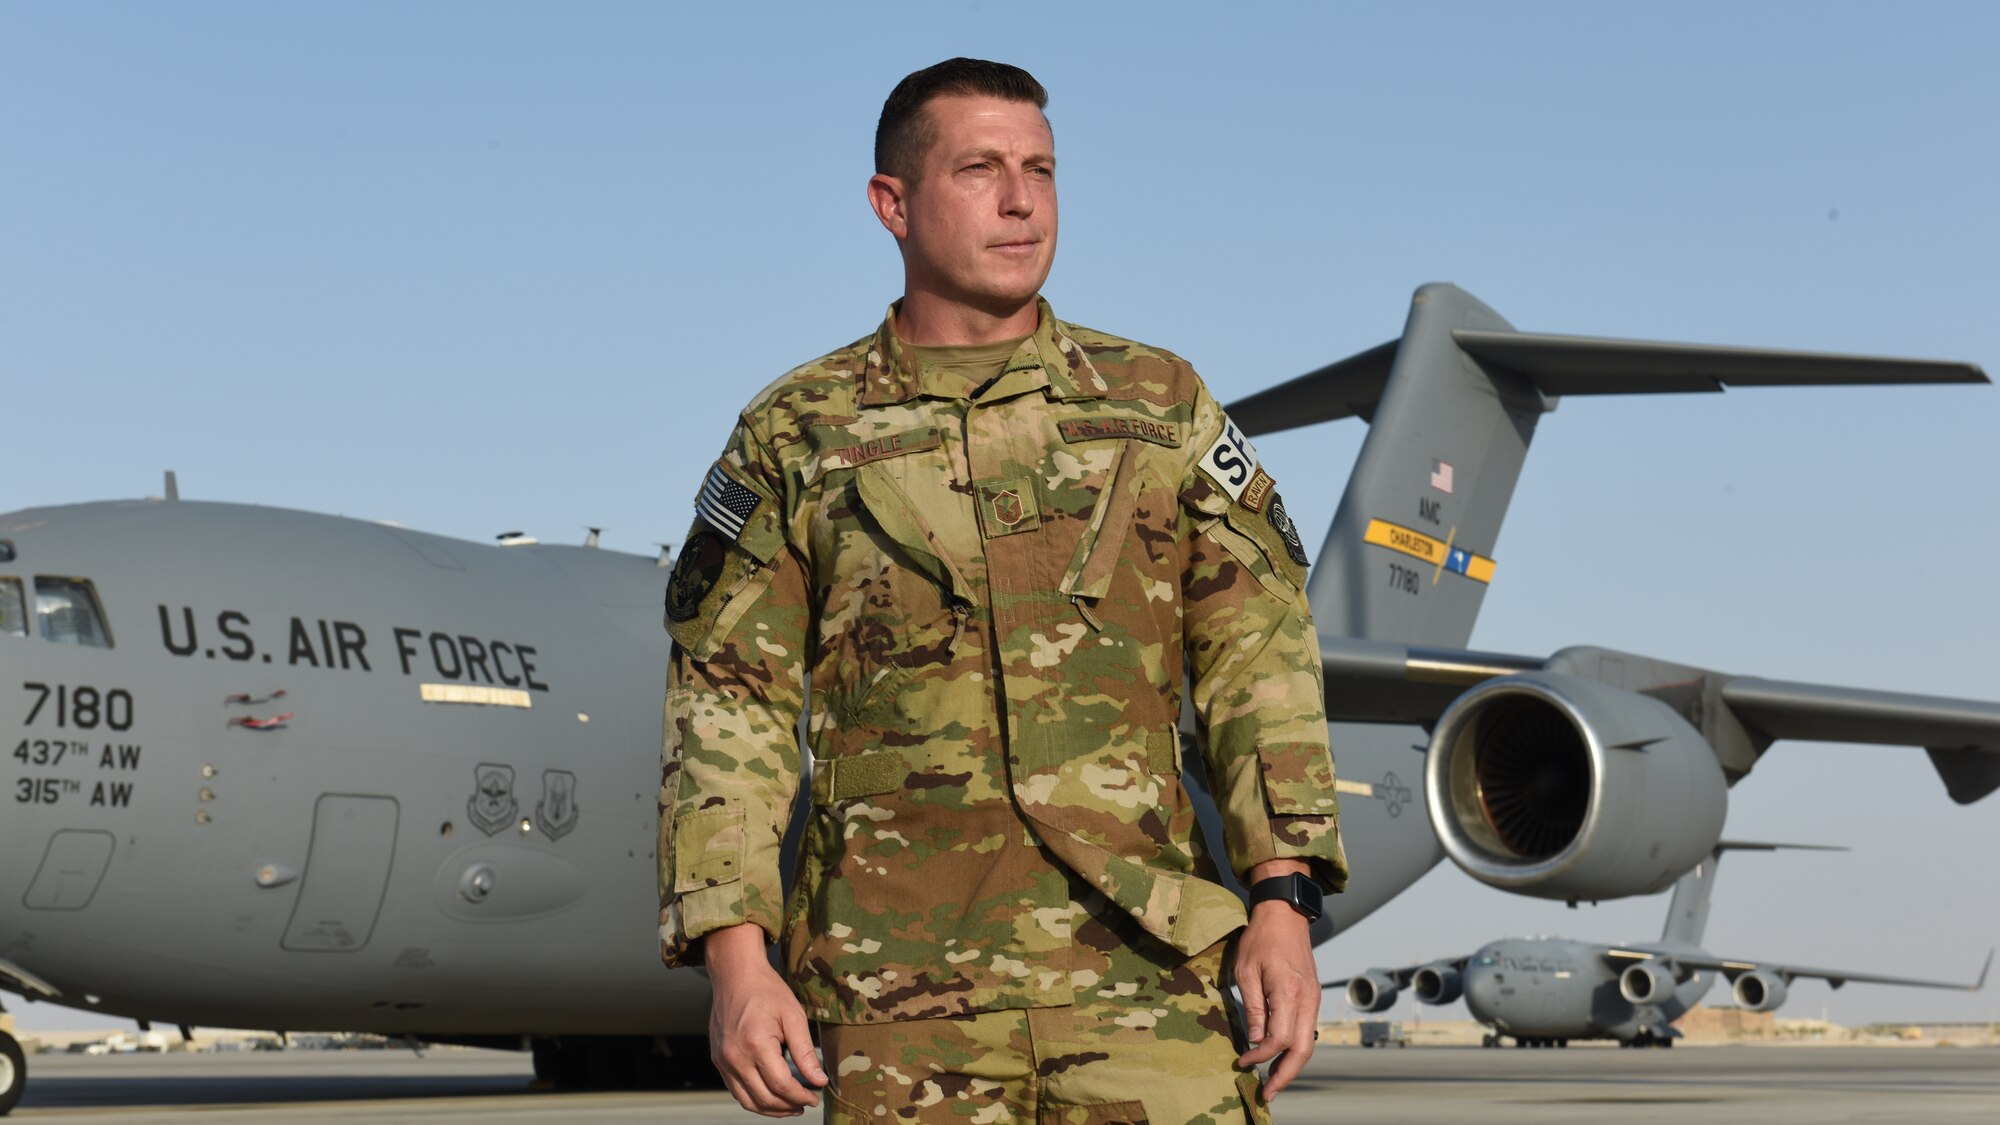 Master Sergeant David Tingle, 816th Expeditionary Airlift Squadron Raven, stands on the flight line at Al Udeid Air Base, Qatar, June 4, 2020. U.S. Air Force Phoenix Ravens are an elite group of Security Forces Airmen that deploy to austere locations and secure flight lines in the U.S. Air Forces Central Command Area of Responsibility to ensure safety of an aircraft and its crew. (U.S. Air Force photo by Senior Airman Shay Stuart)